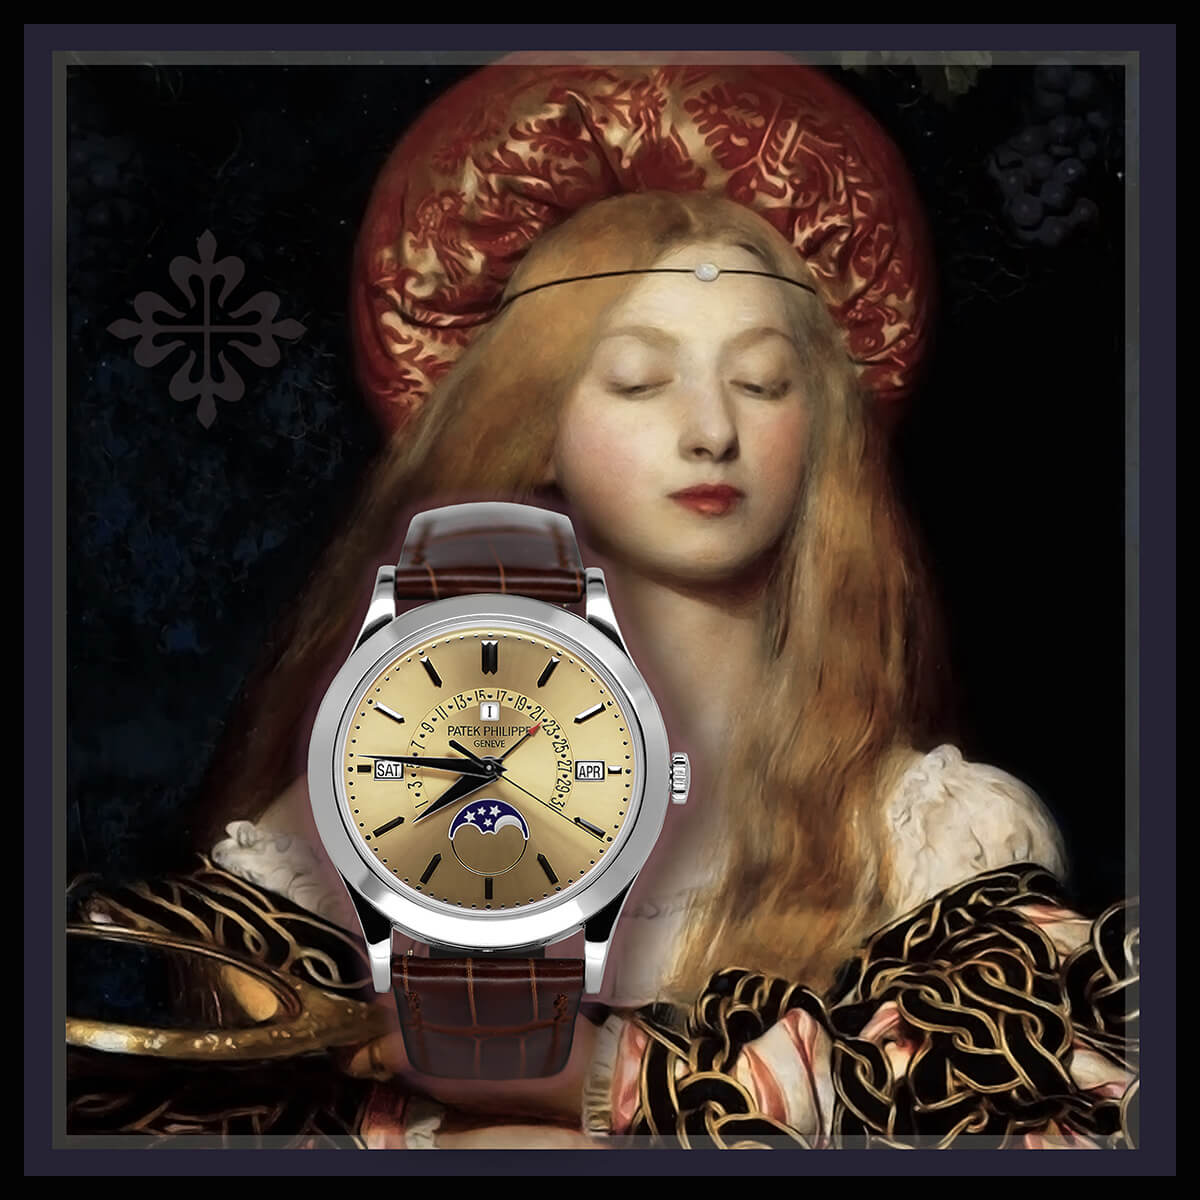 Patek Philippe Ref 5496P over Vanity by Frank Cadogan Cowper (image courtesy @thehealer74)